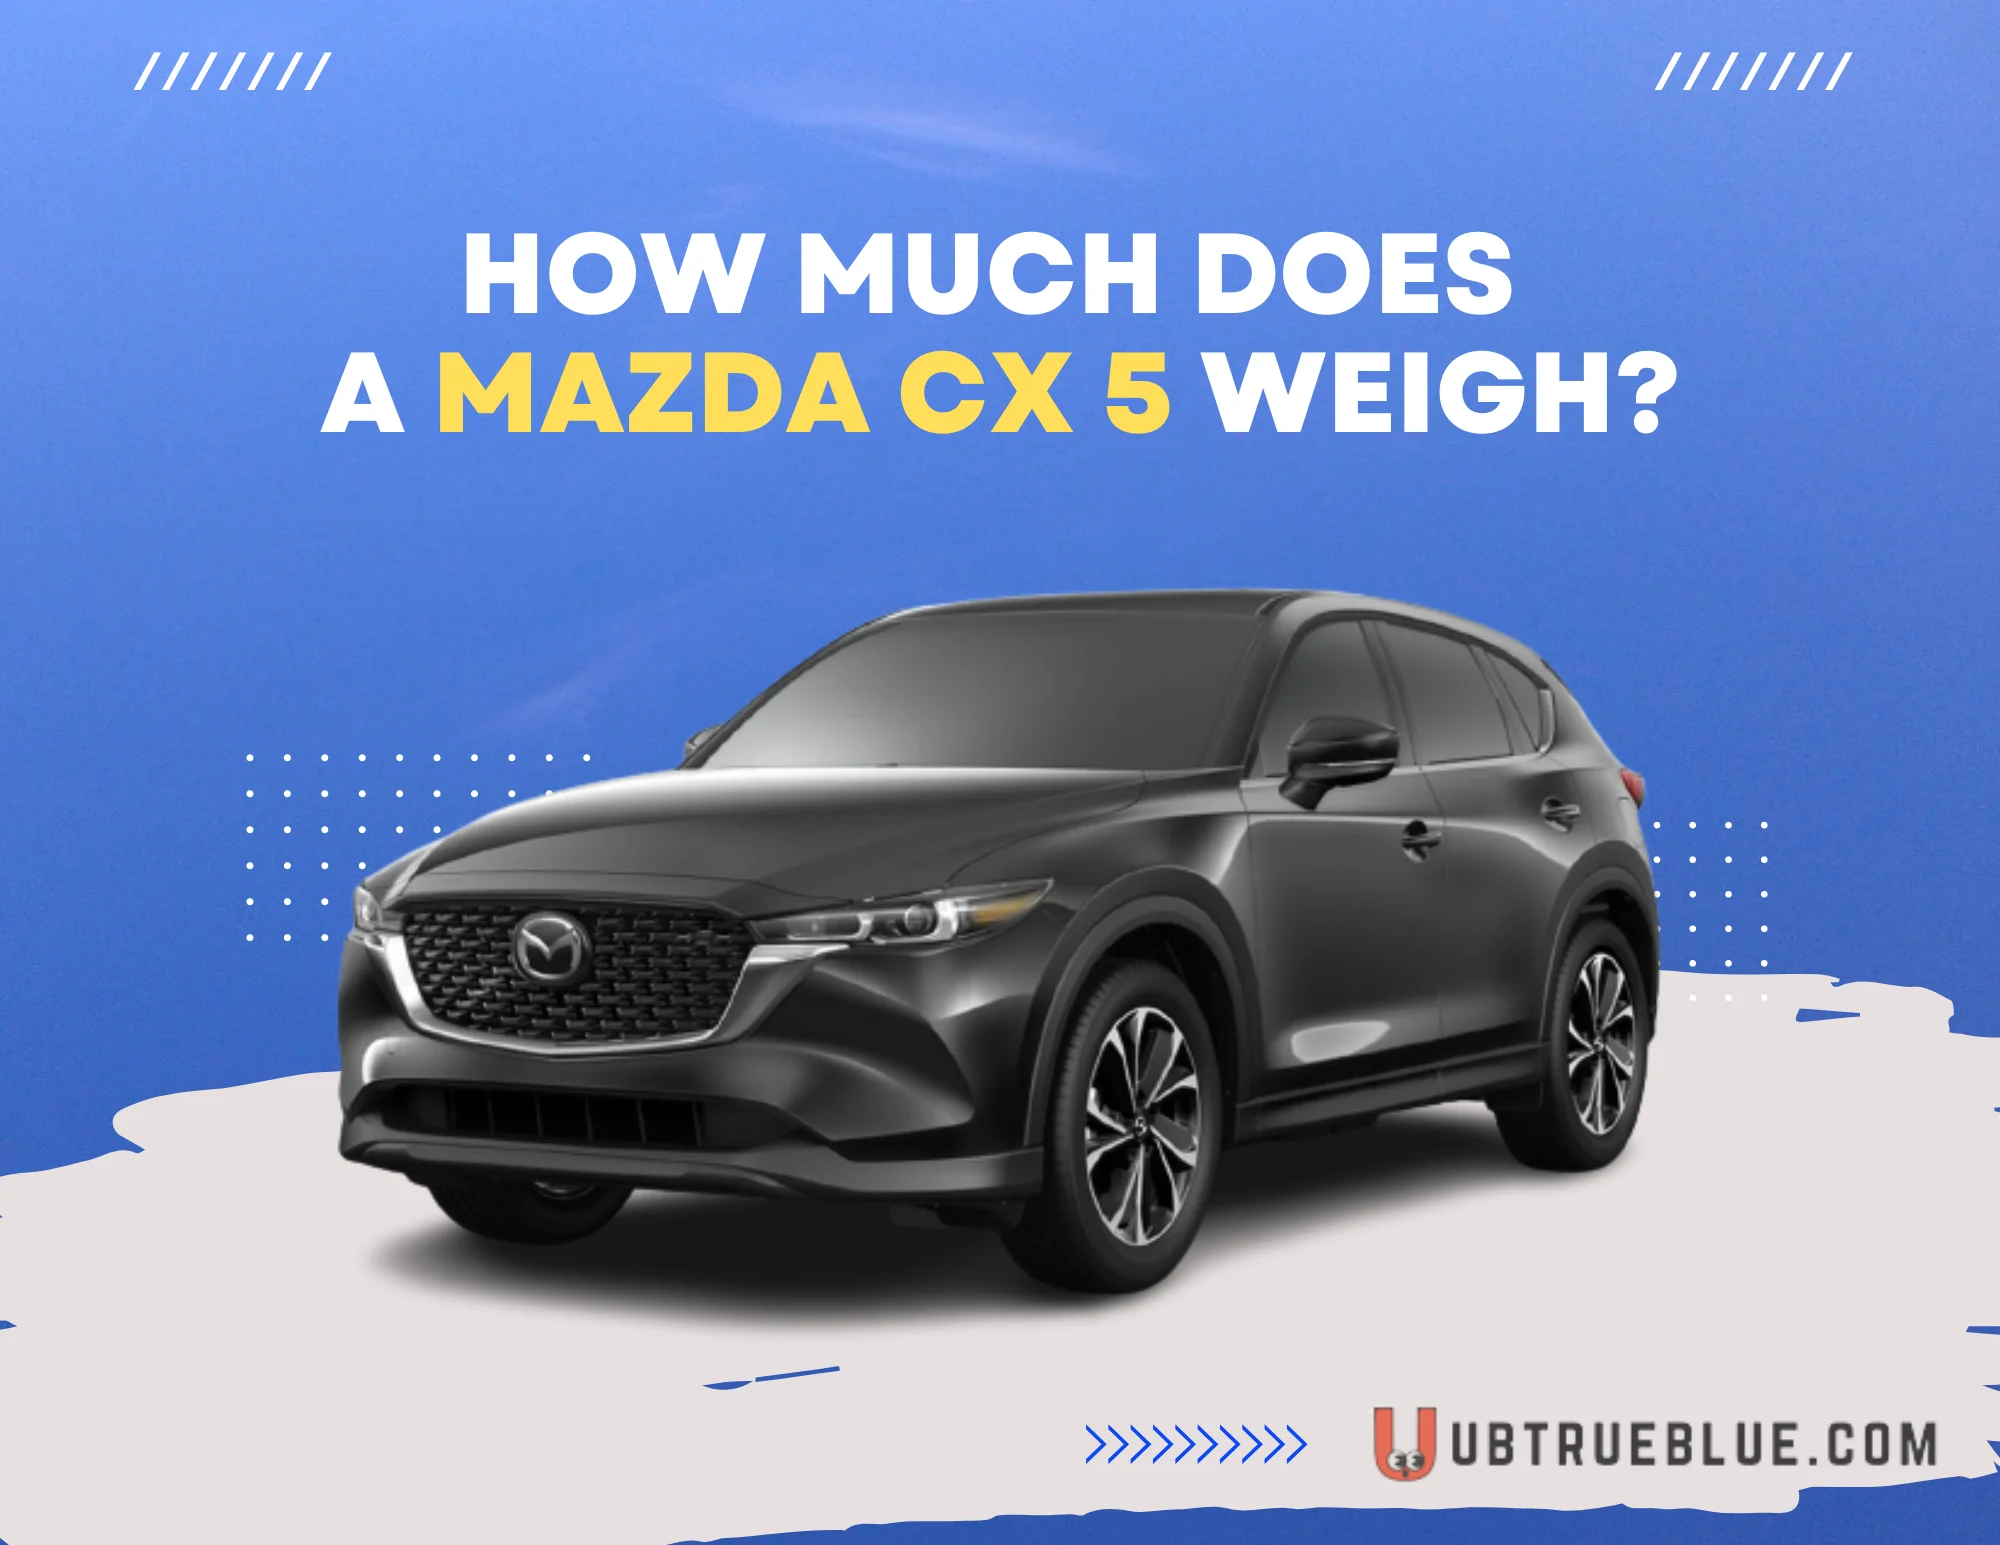 How Much Does A Mazda Cx 5 Weigh On Ubtrueblue Automotive CX Weigh? Before You Drive Off, Know The Facts: Curb Weight Kg Cx-5 Length Dimensions 9 2023  Full